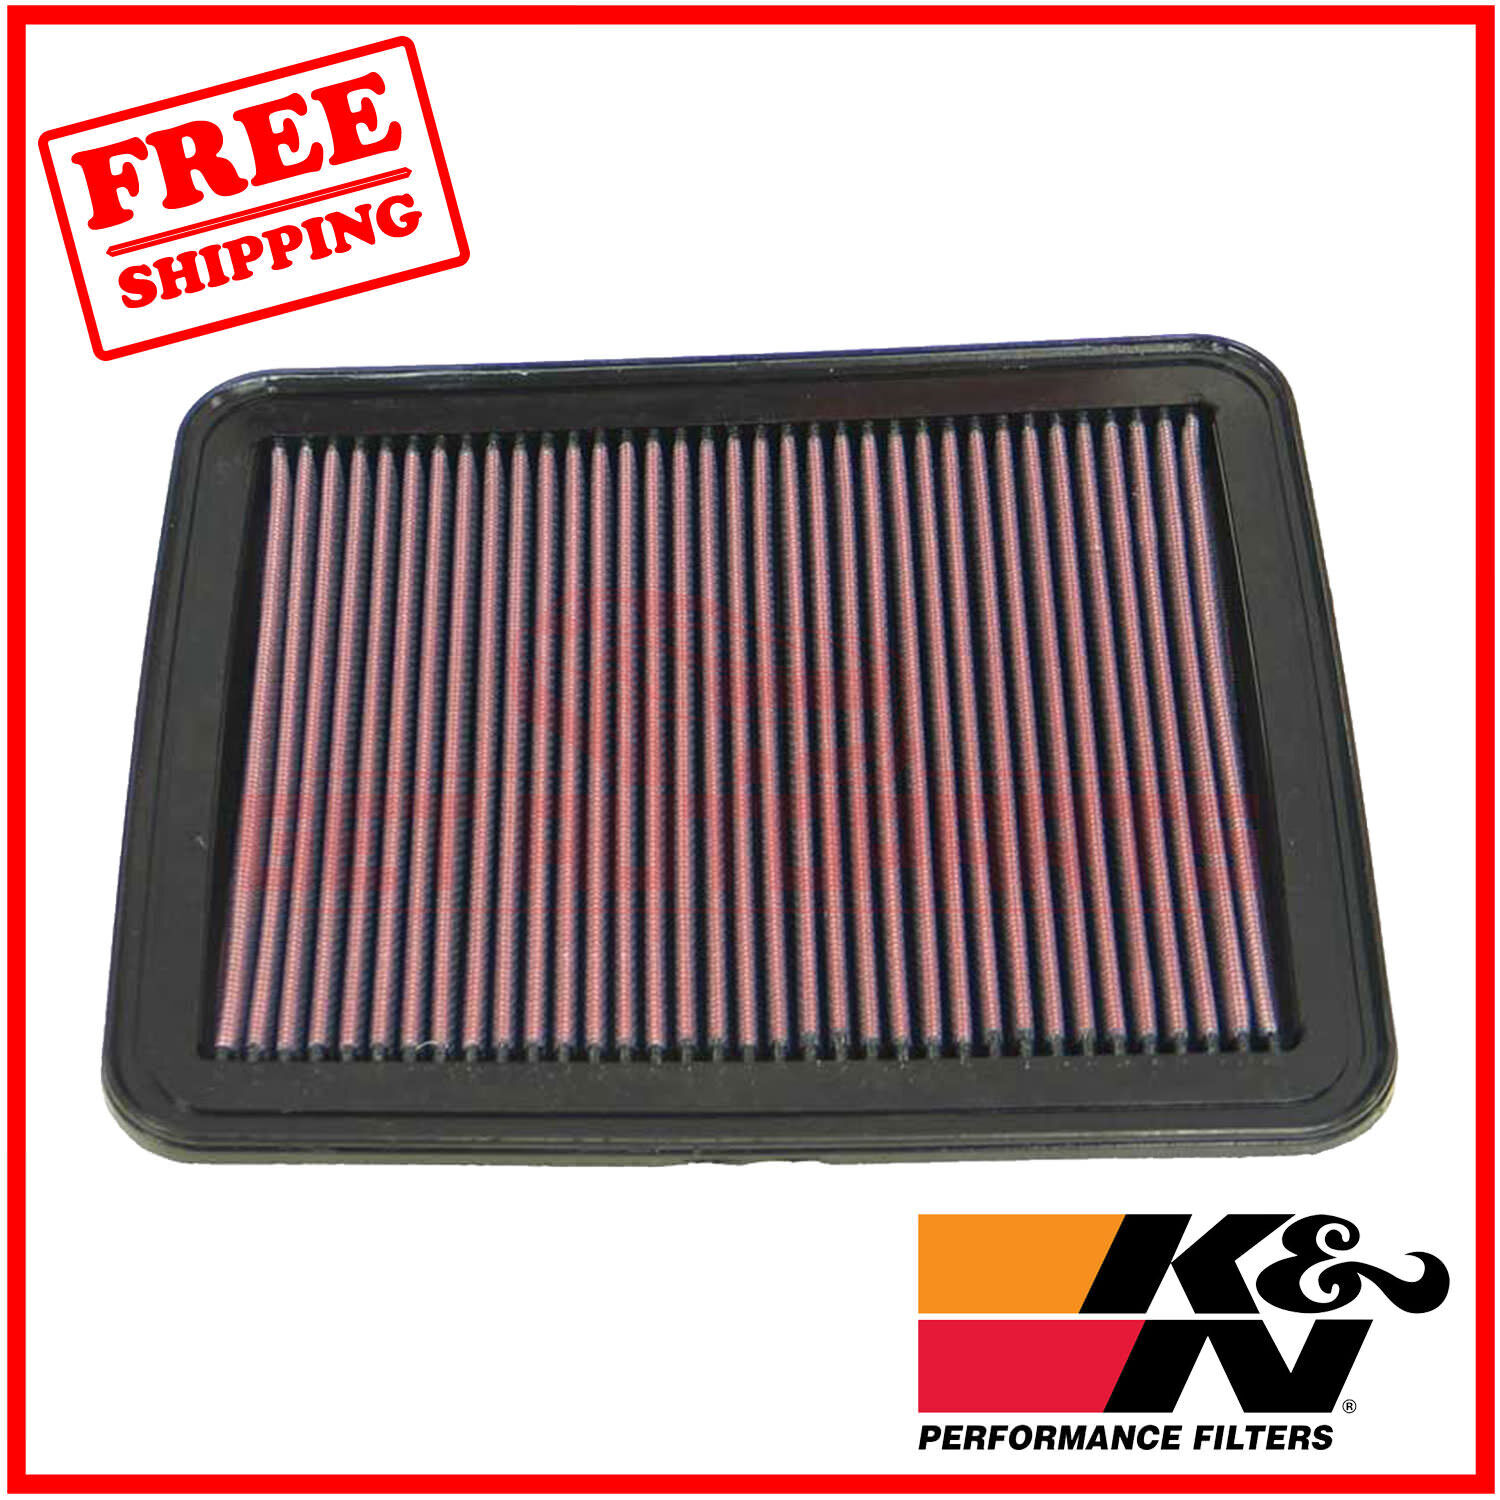 K&N Replacement Air Filter fits Buick Lucerne 2006-2011